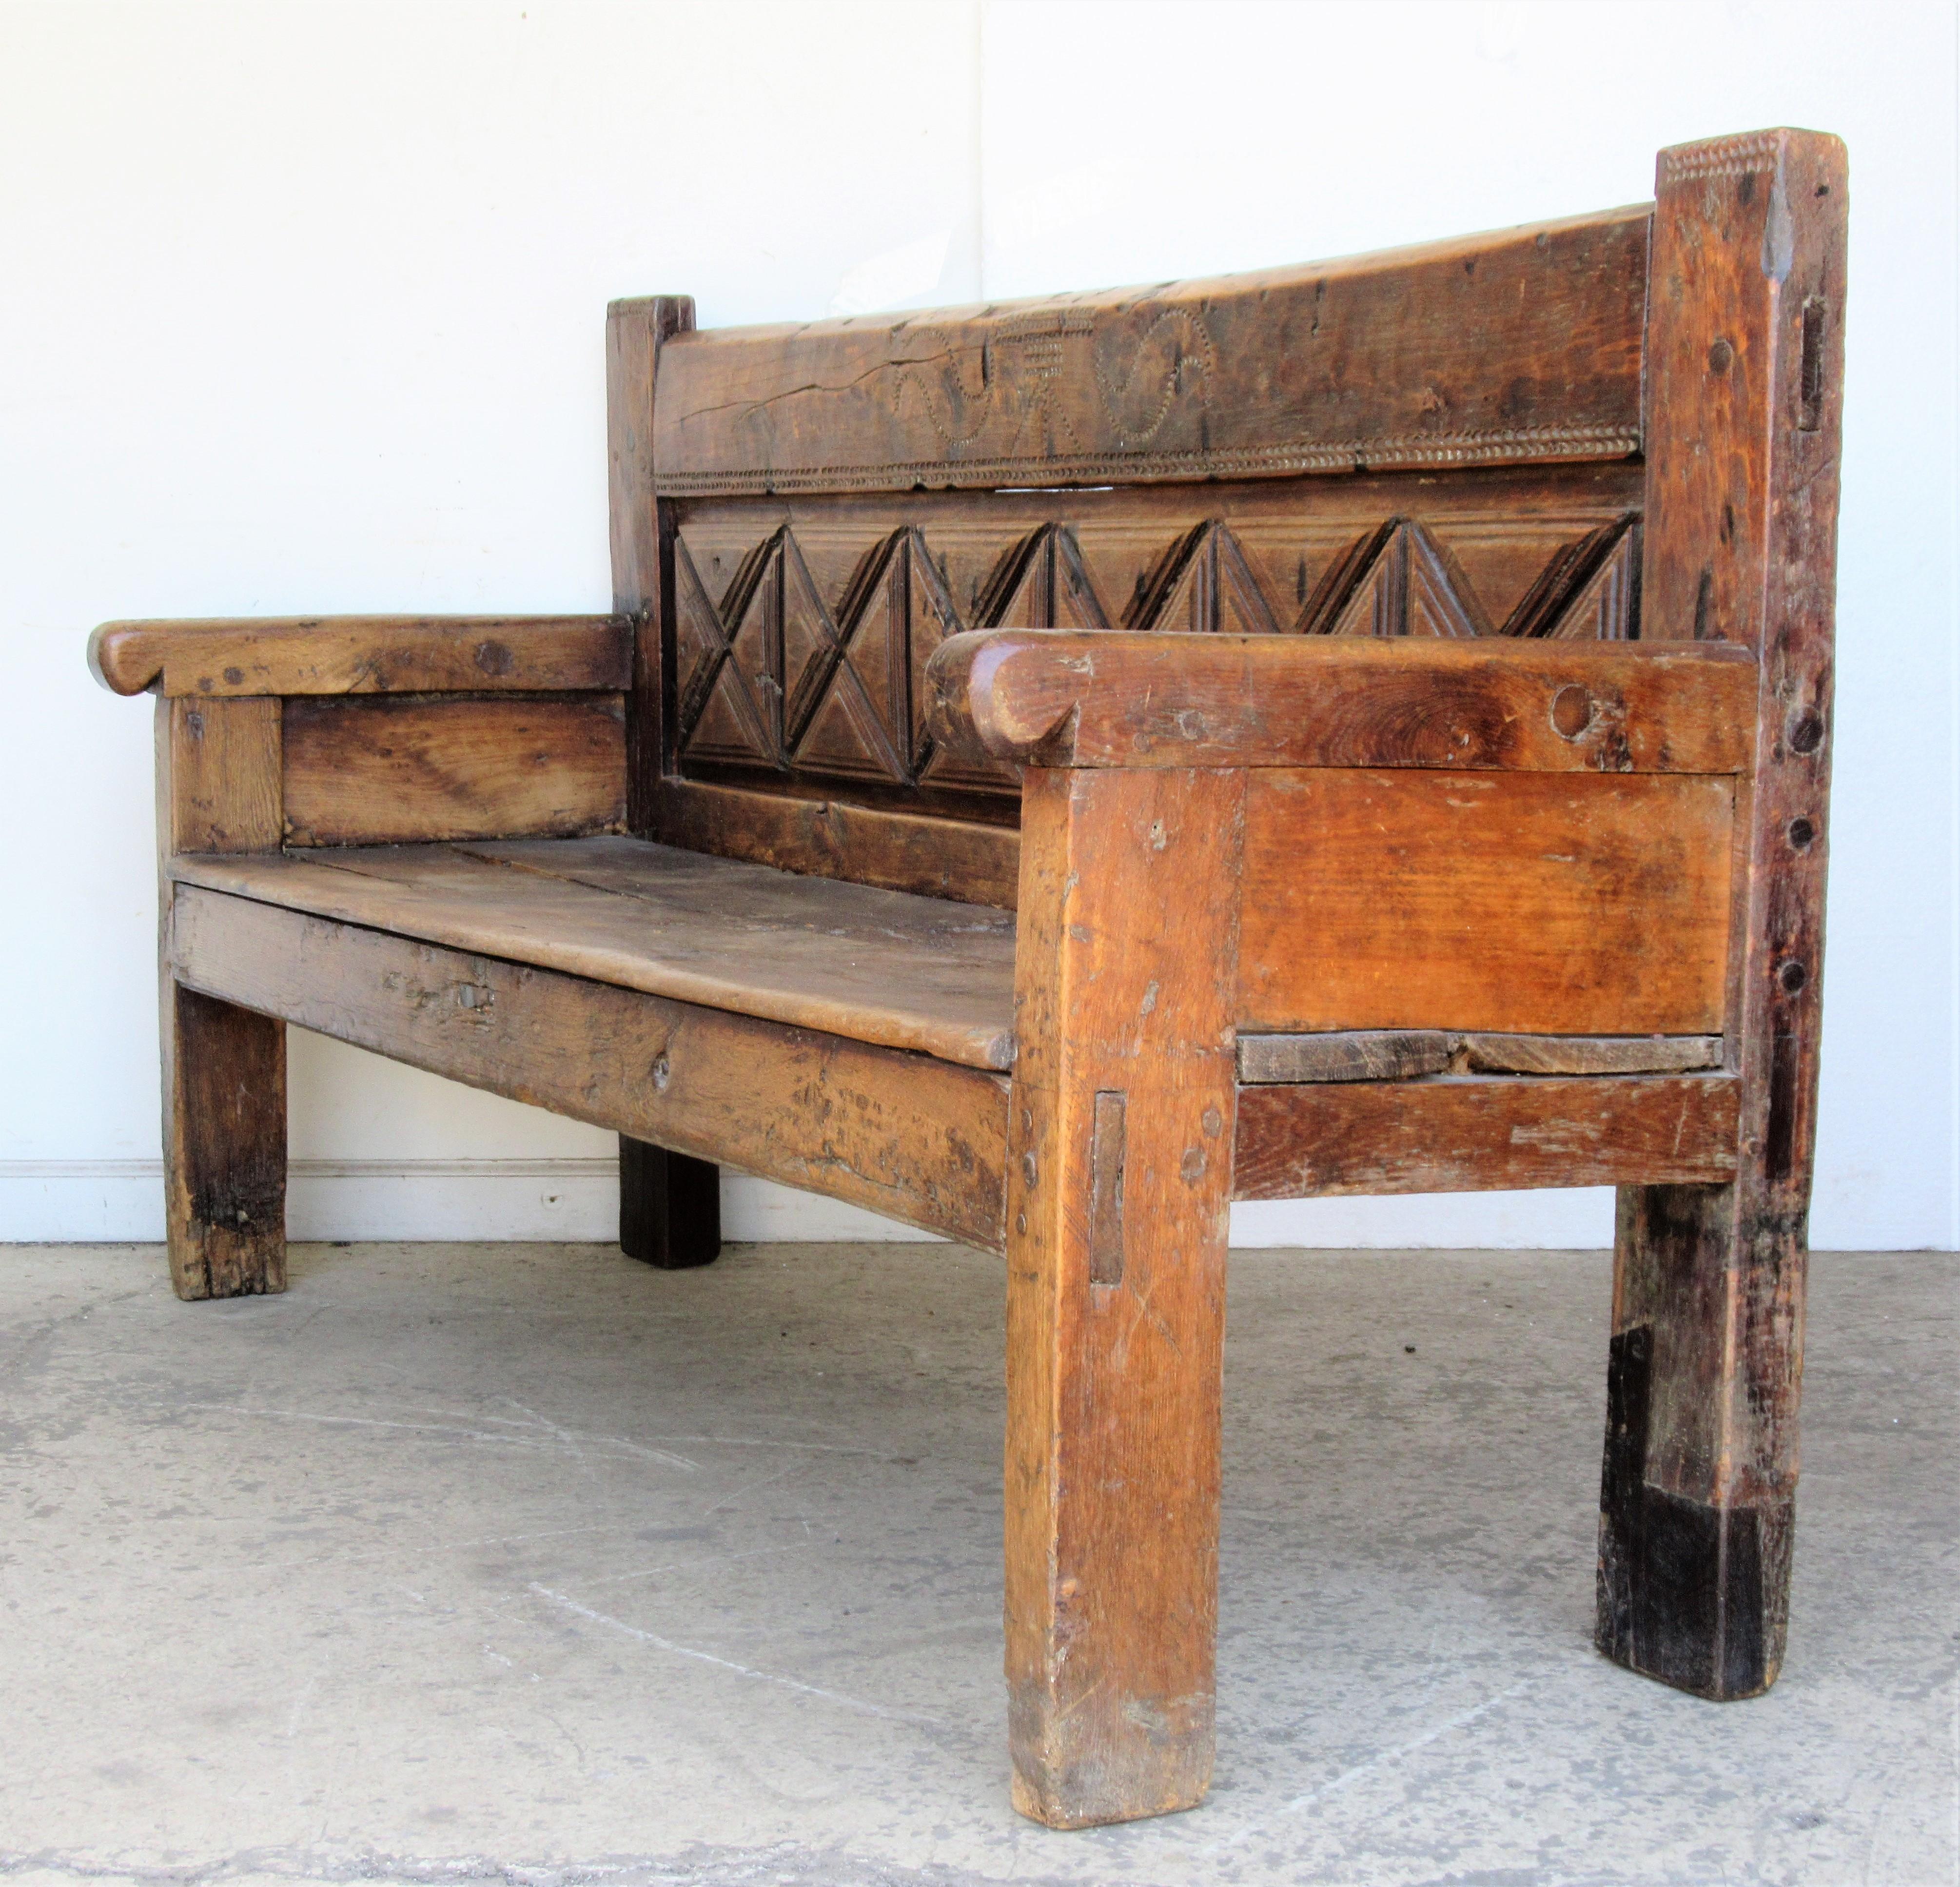 Very early Spanish rustic large settle bench with pegged / mortise tenon construction / geometric back with carved details / thick hand hewn boards - all over beautifully aged original old color and surface to wood. A hard to find piece of antique